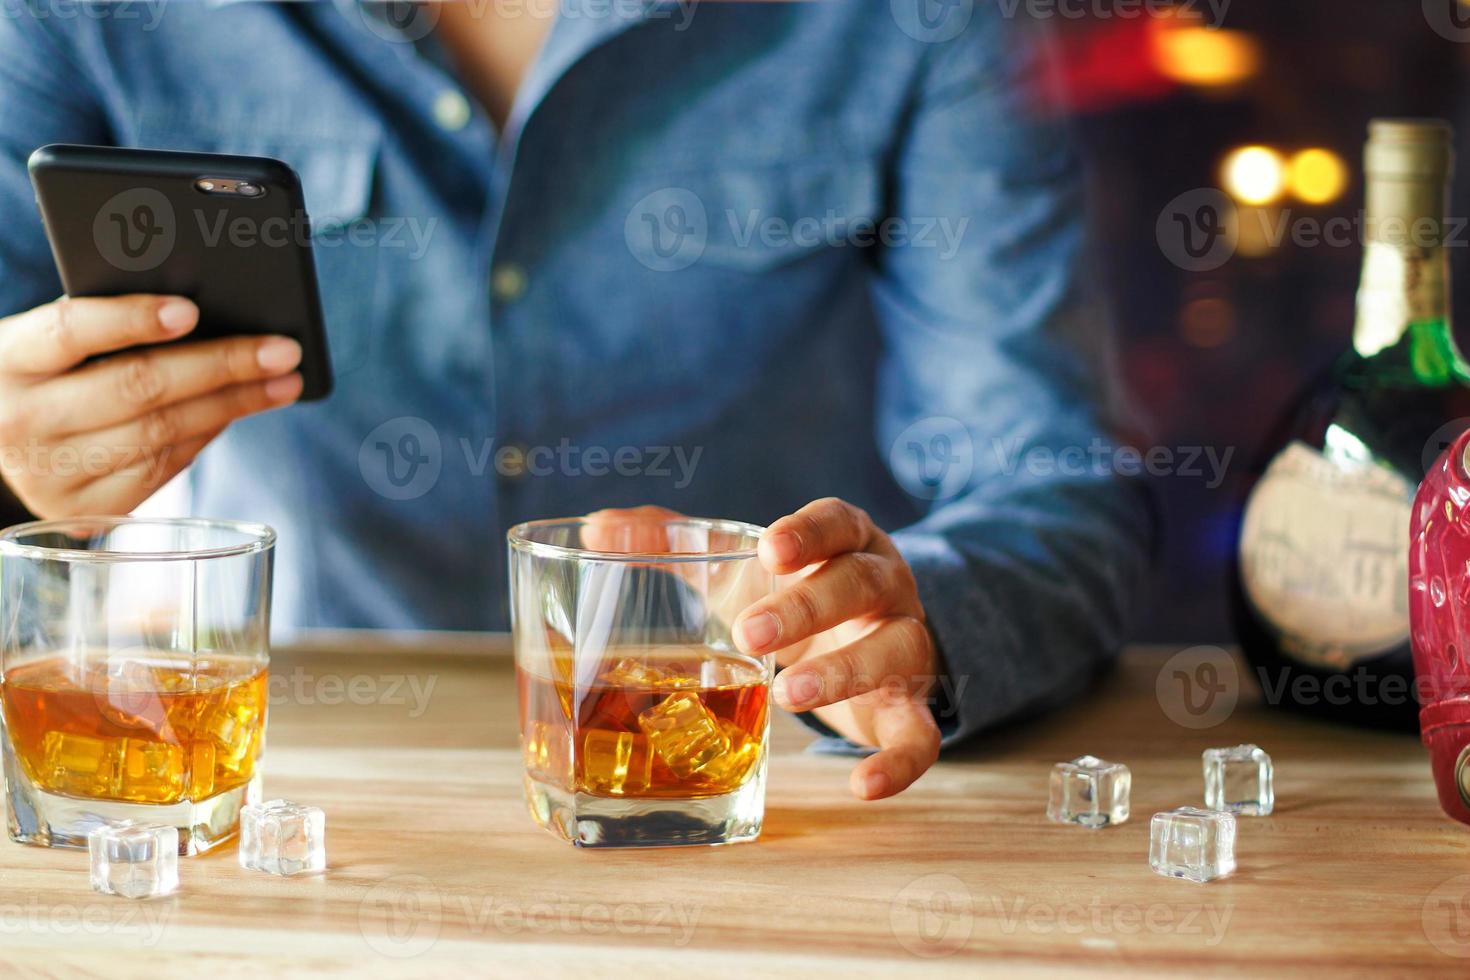 Man using smartphone while drink of whiskey alcoholic beverage at bar counter in the pub photo